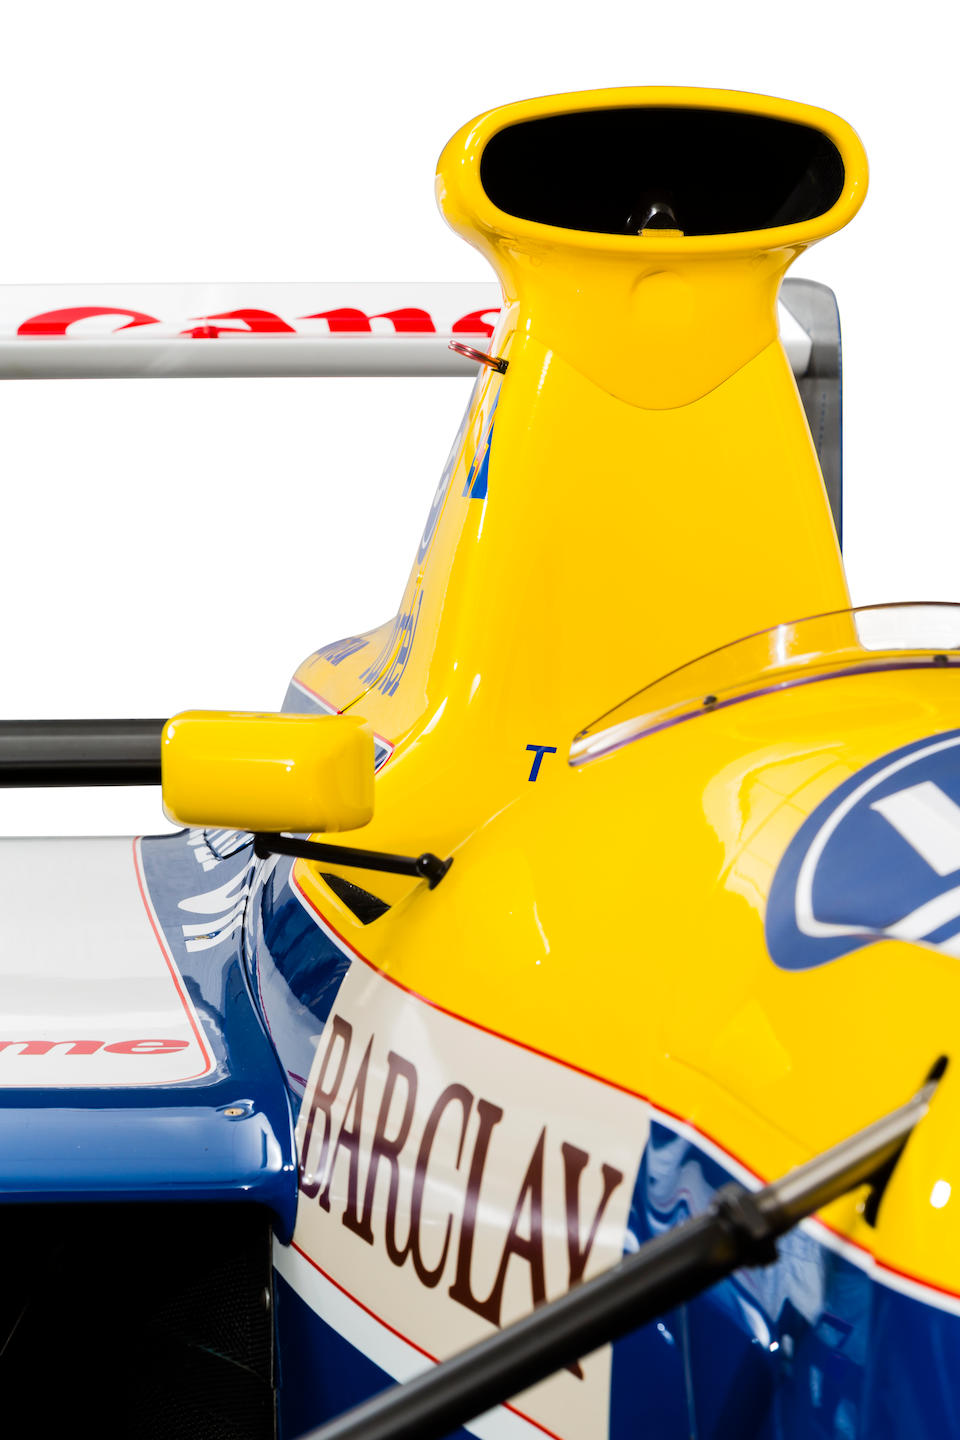 Offered direct from the Williams Grand Prix Reserve Collection  The Ex-Thierry Boutsen, ex-Riccardo Patrese, 3rd place US Grand Prix,1990 Williams-Renault FW13B  Formula 1 Racing Single-Seater  Chassis no. FW13B-07 Engine no. RS02 - 129